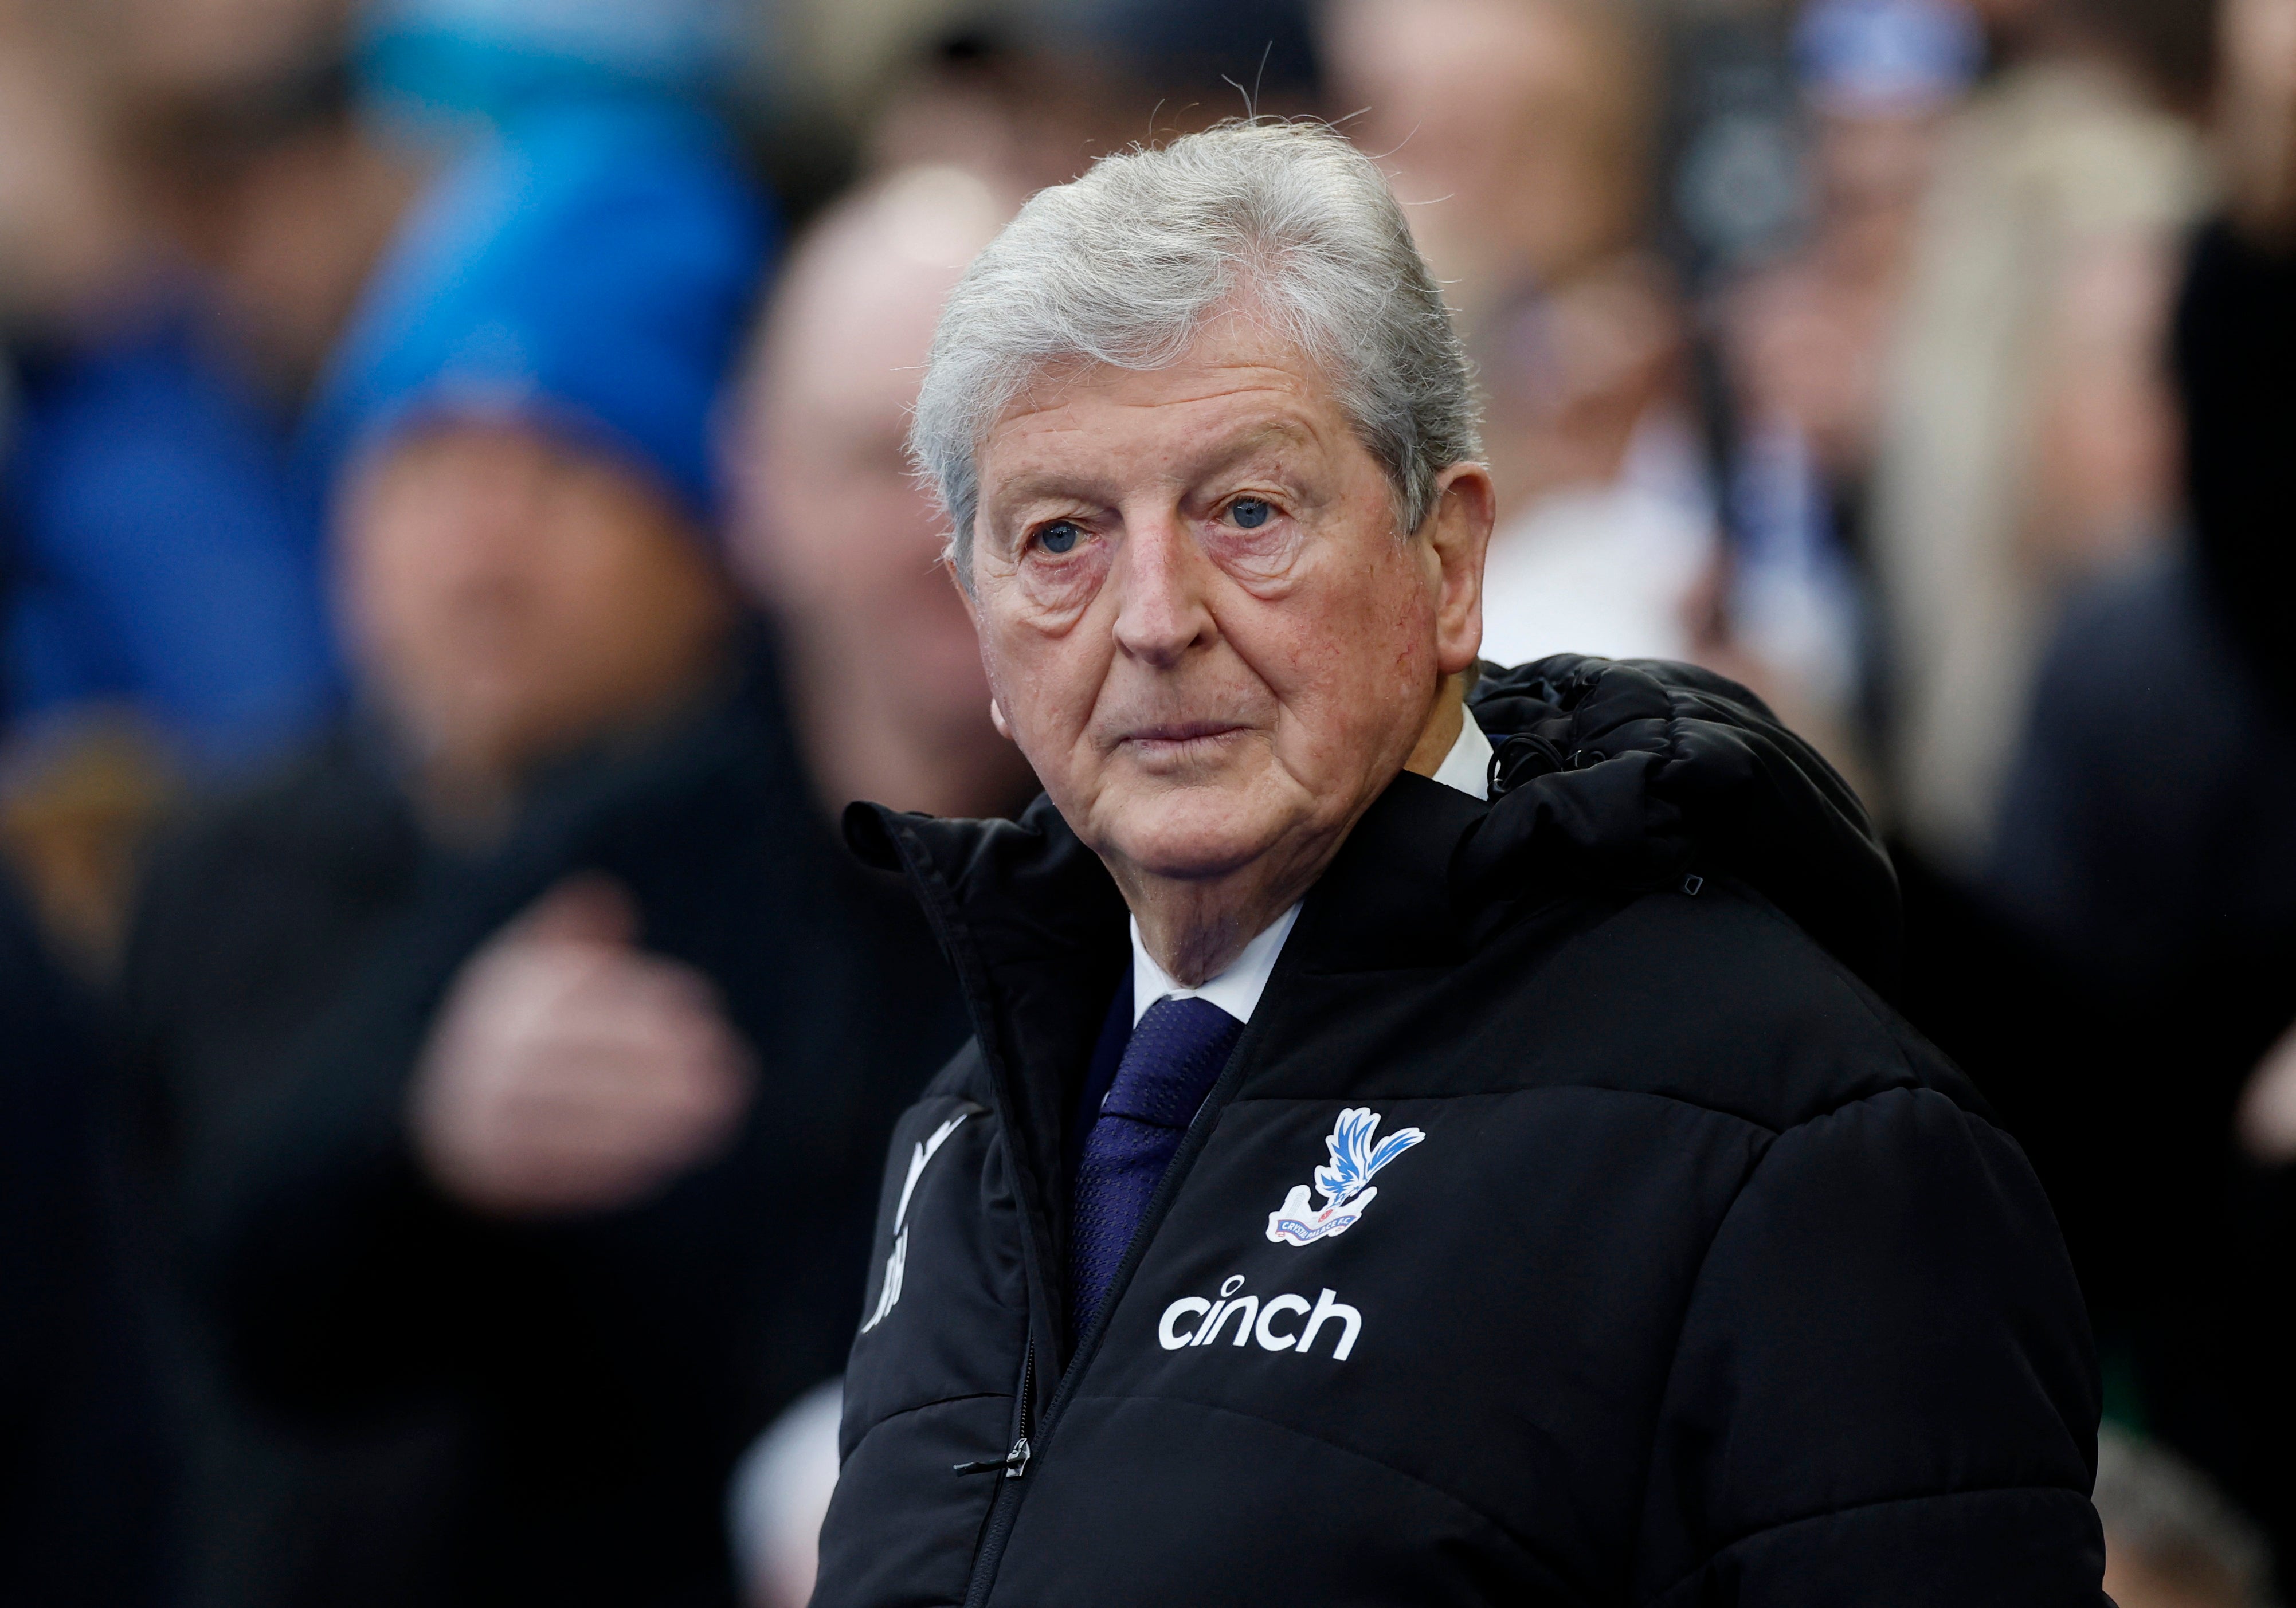 Why Is Roy Hodgson Fired News Viral: What Happened To Him?